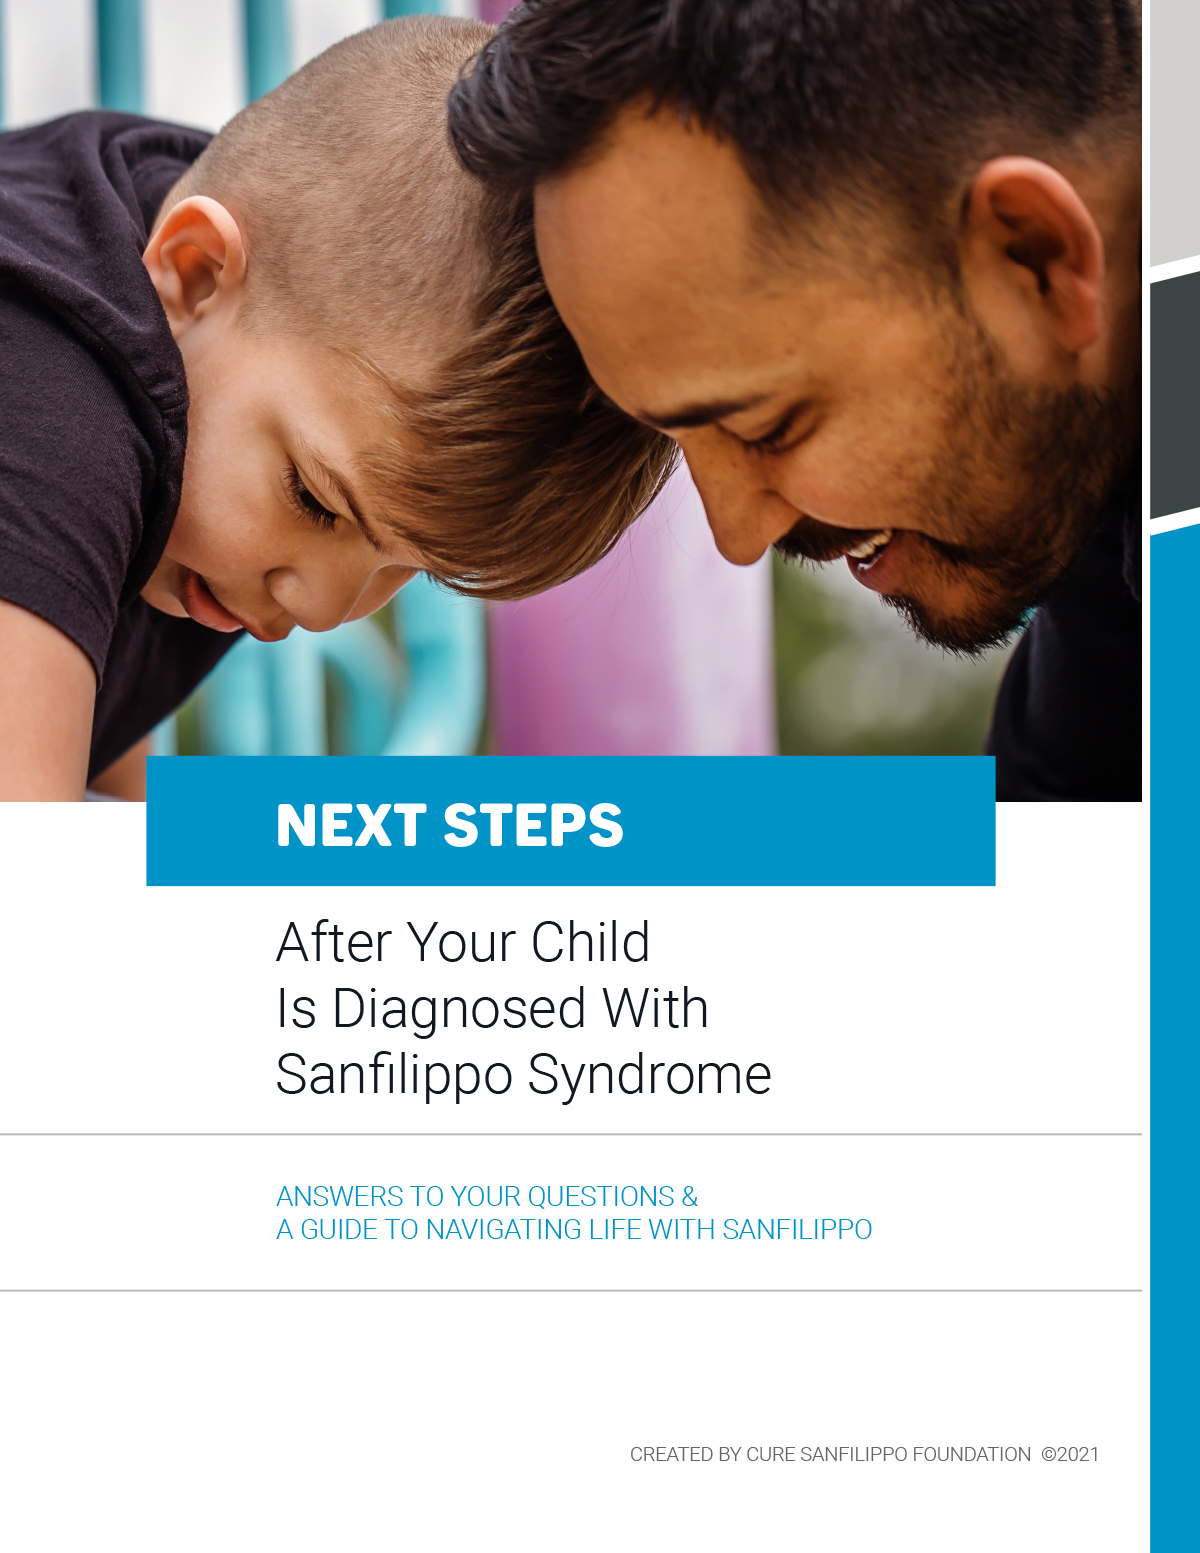 Next steps after diagnosed with Sanfilippo